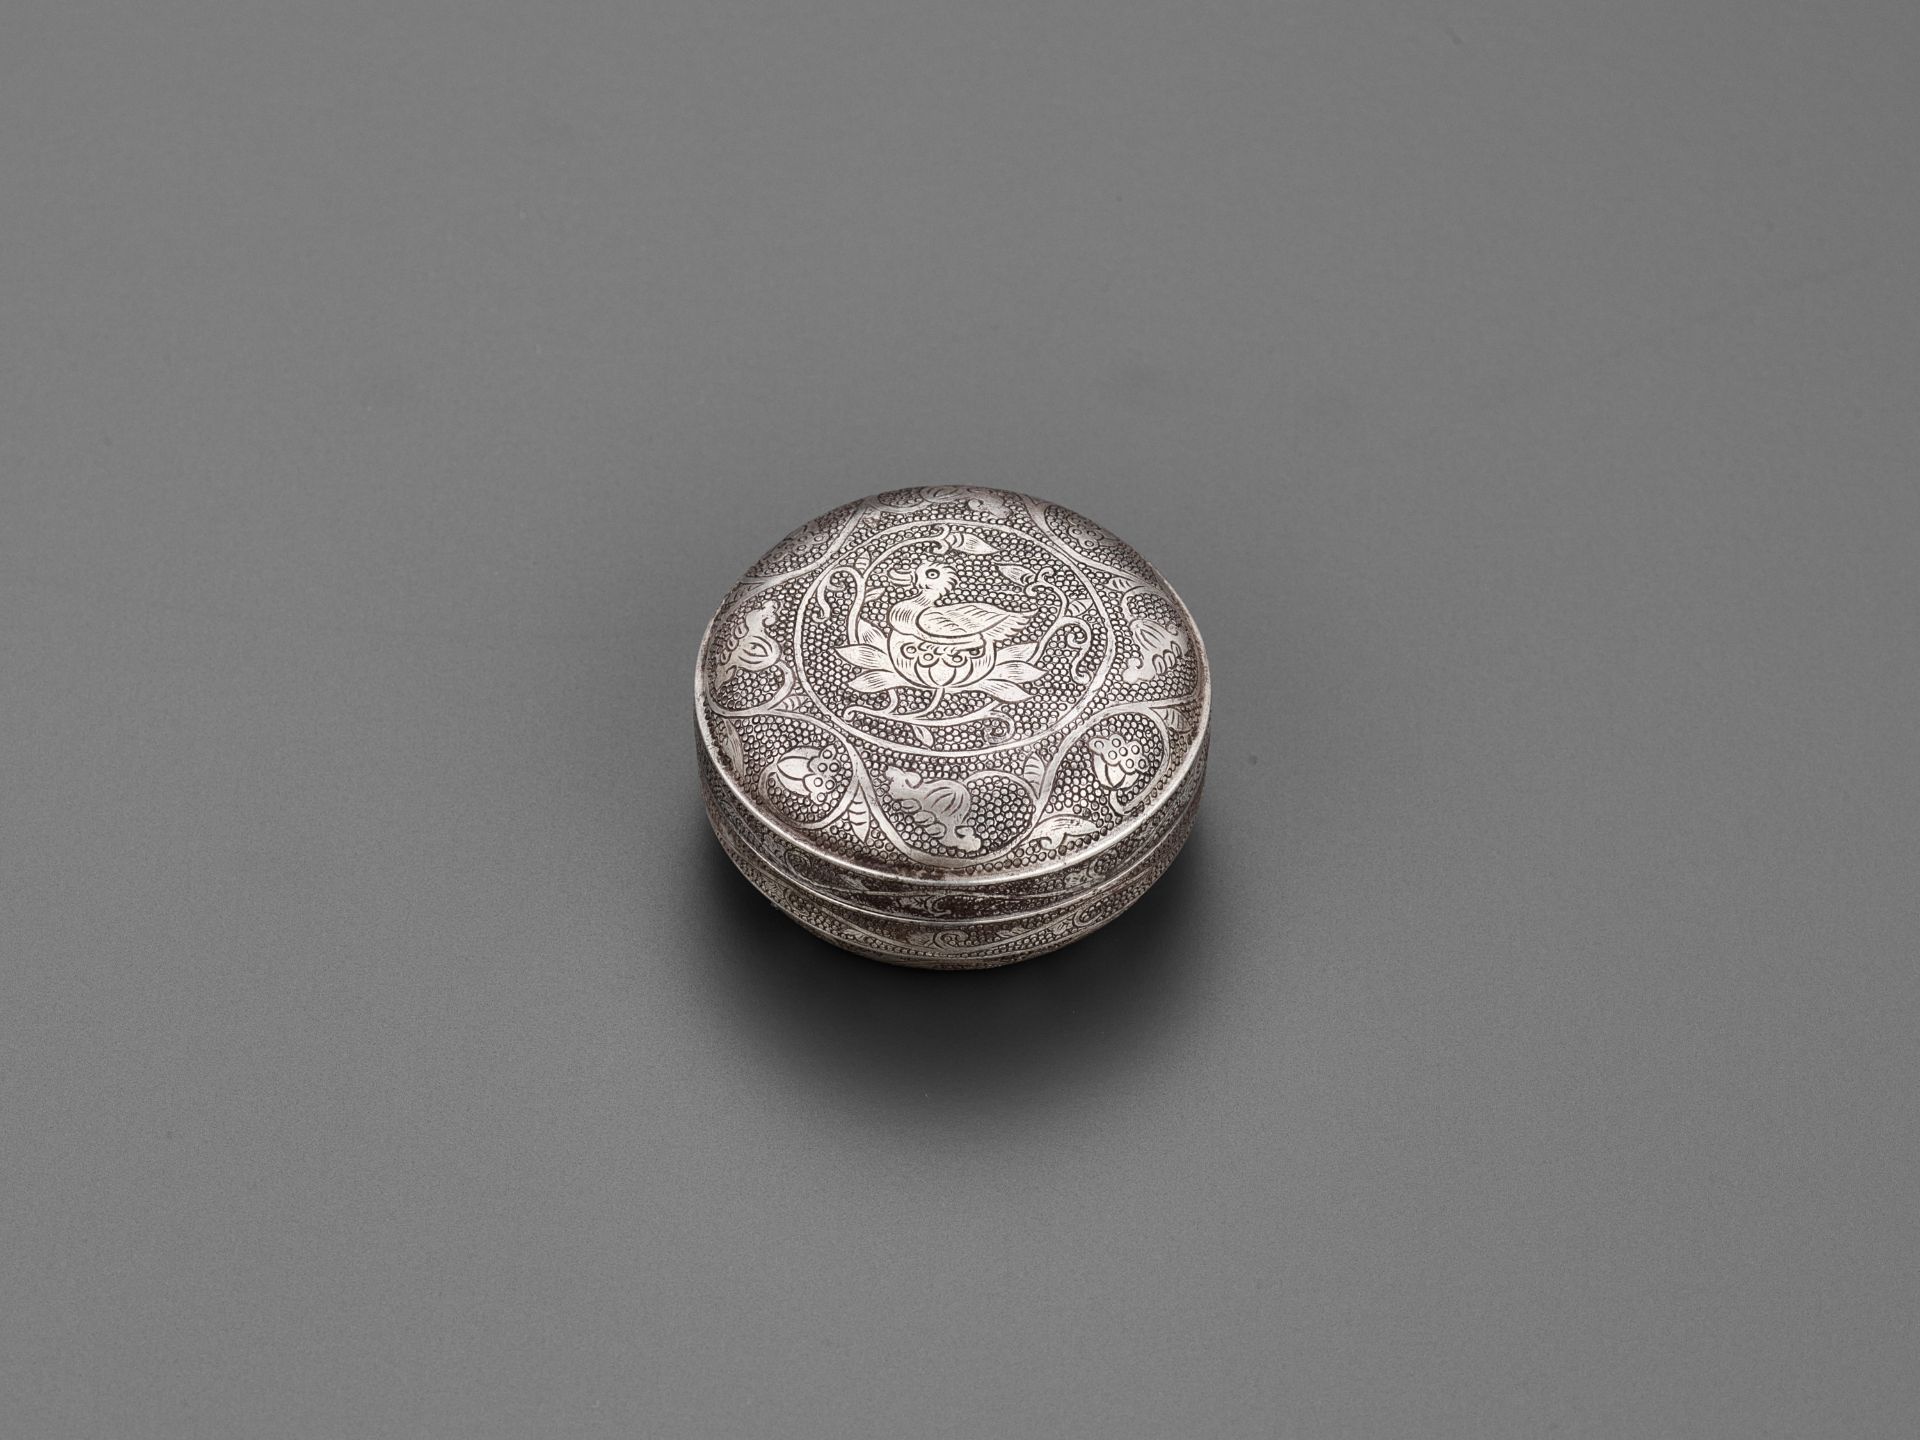 A 'MANDARIN DUCK' SILVER BOX AND COVER, TANG DYNASTY - Image 12 of 19